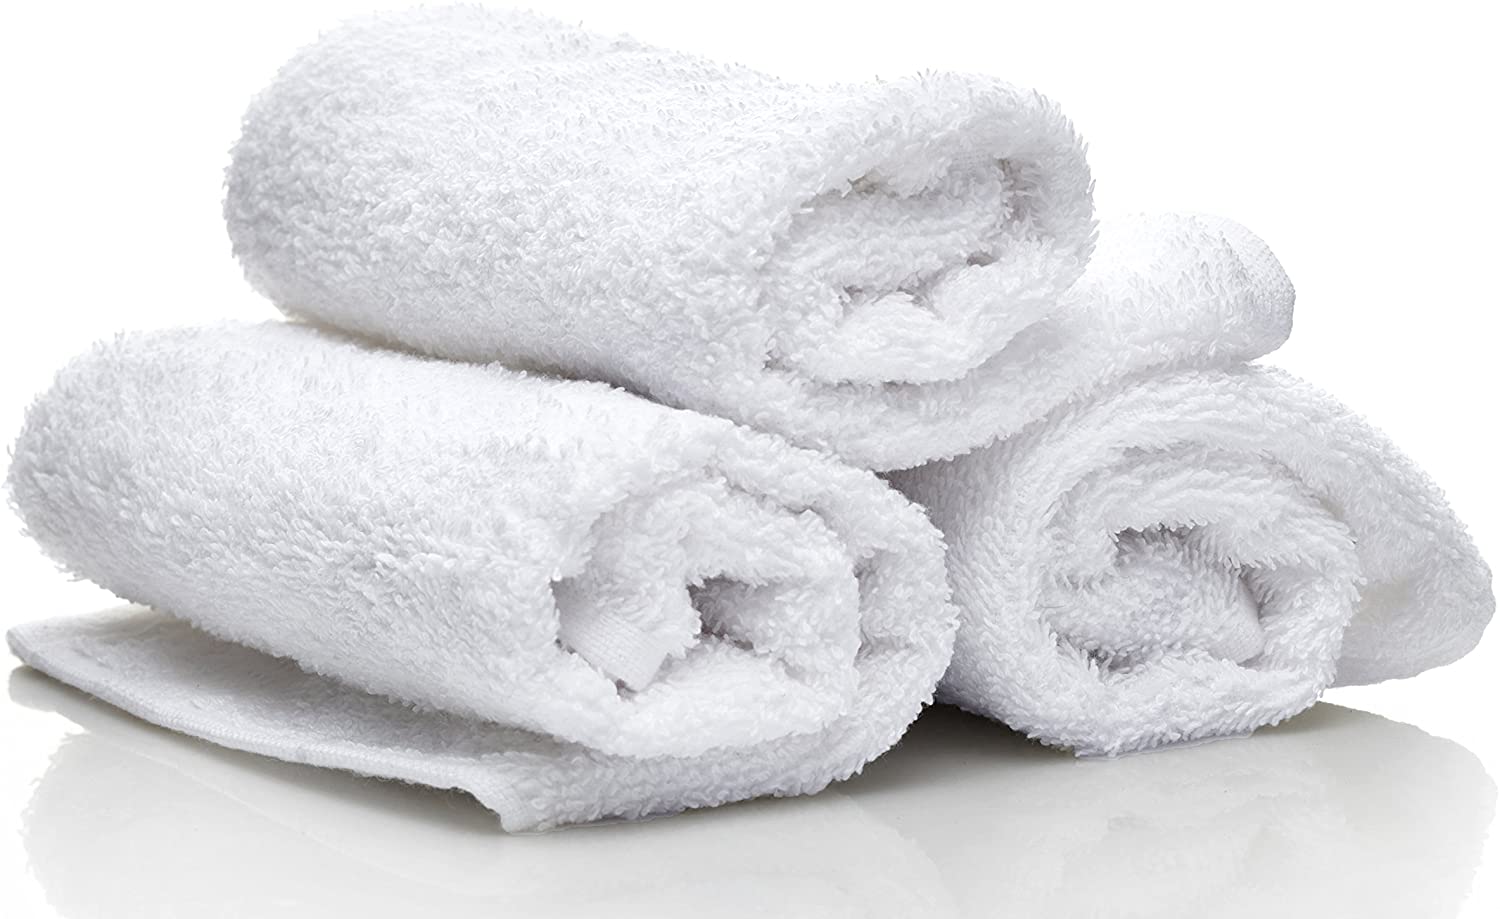 Utopia 24-Piece Cotton Washcloth Set - 30x30 cm White - 100% Ring Spun Cotton Flannel Face Towels, Highly Absorbent and Soft Feel Fingertip Towels 8